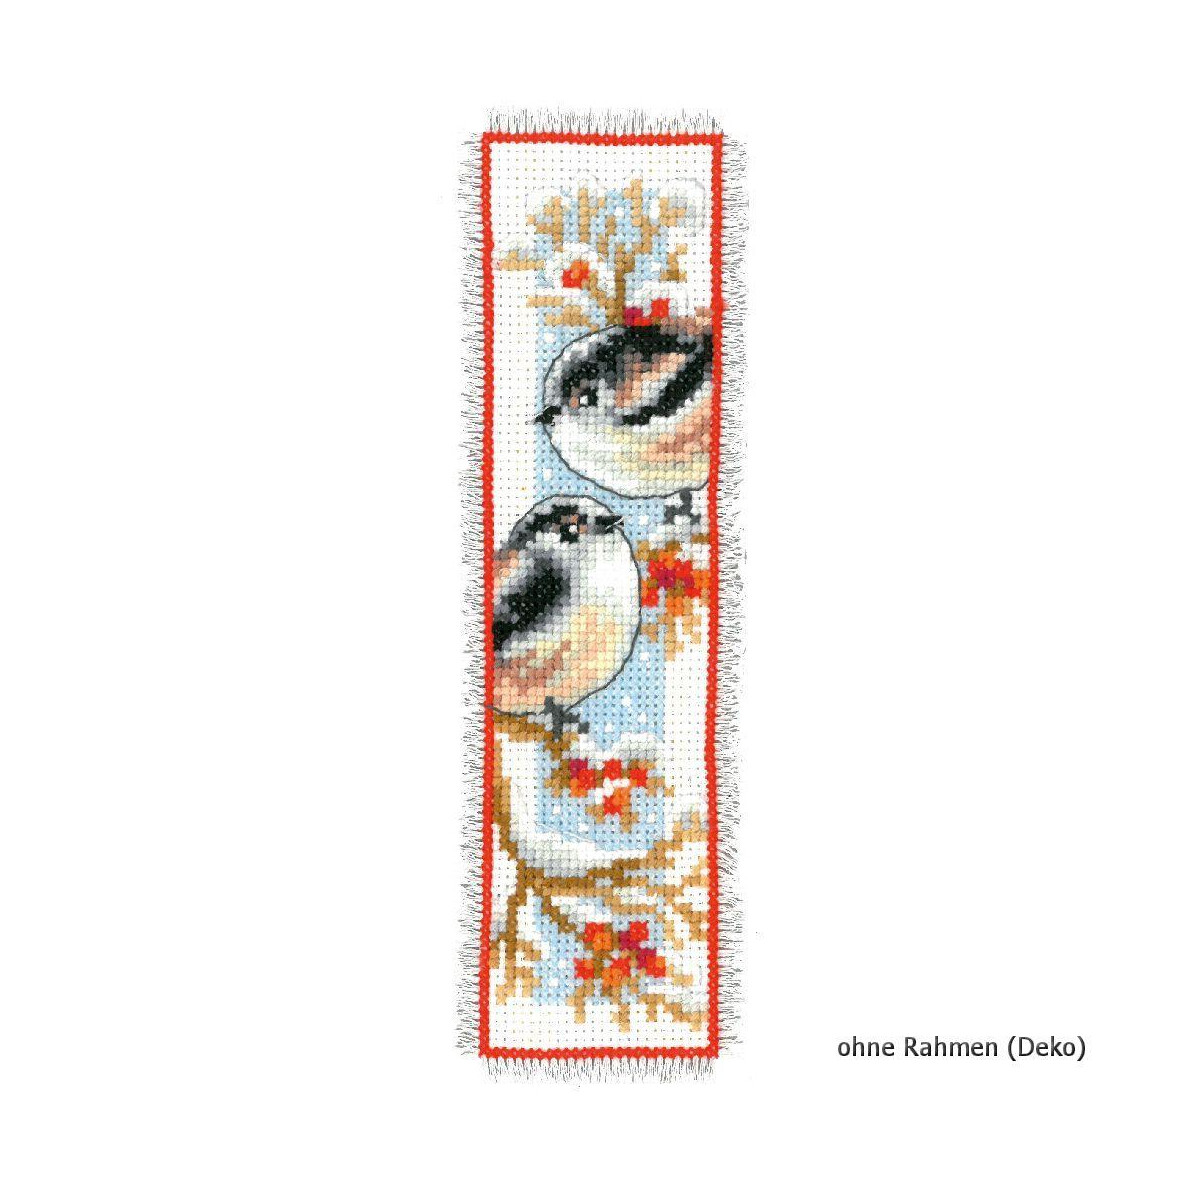 Vervaco Bookmark counted cross stitch kit Long-tailed...